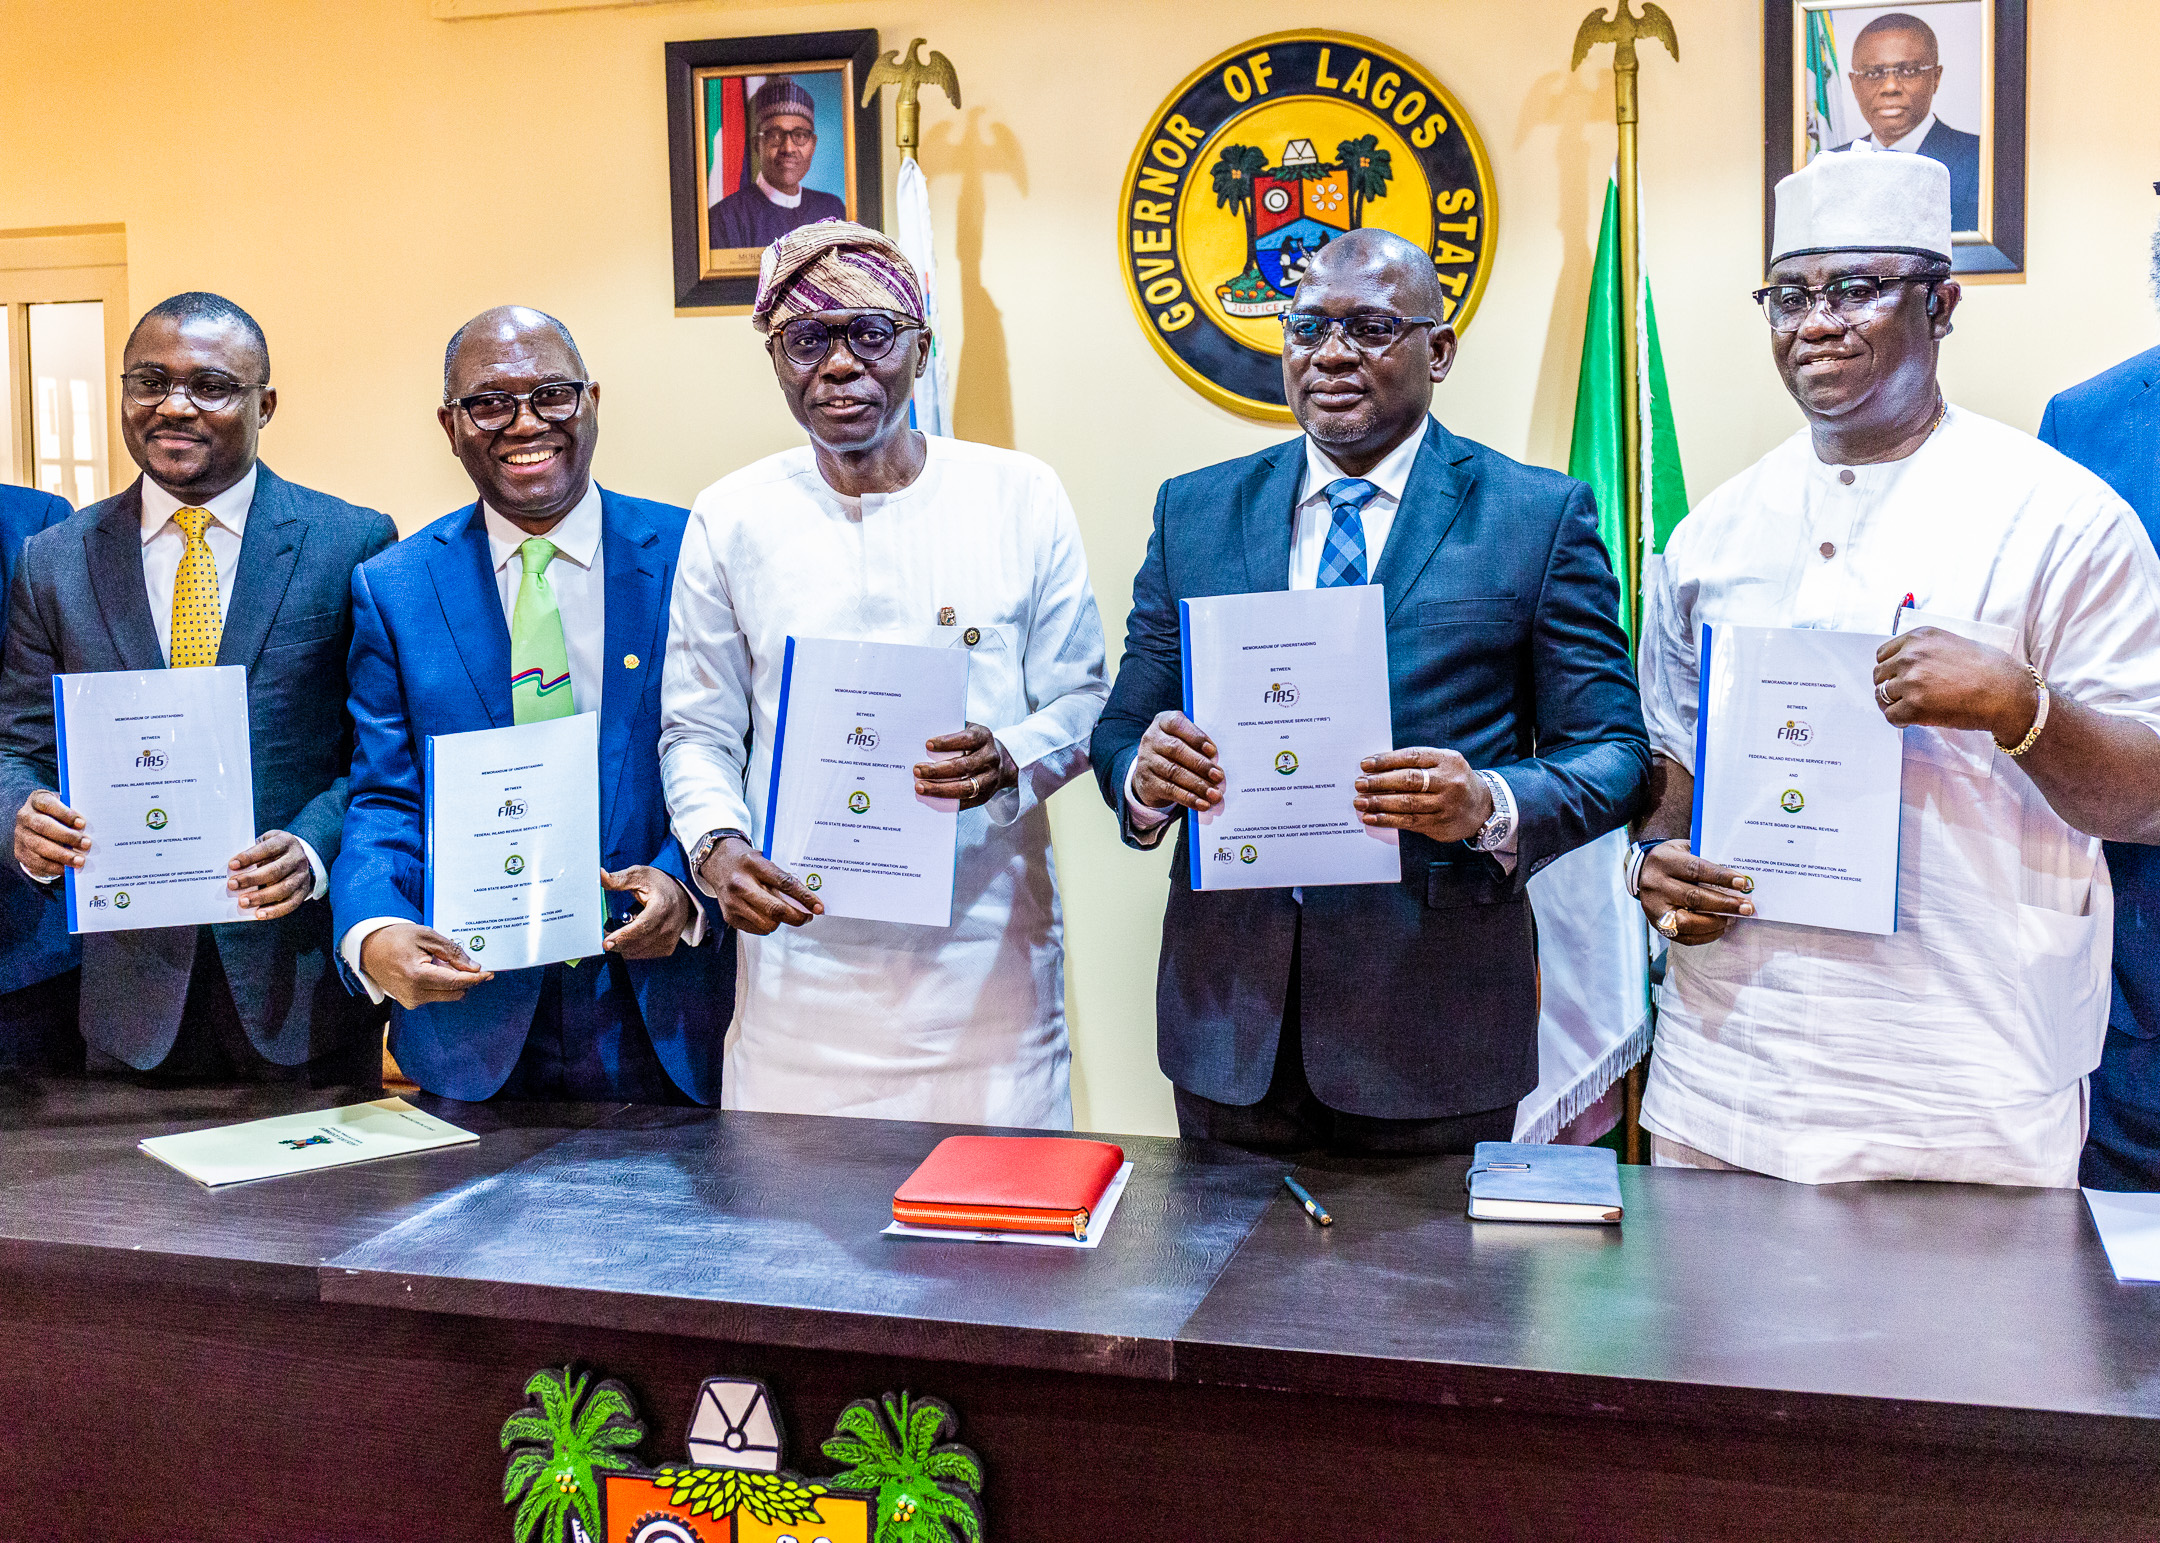 (R-L) Honourable Minister of State for Budget and National Planning, Prince Clem Agba; Executive Chairman, FIRS, Muhammad Nami; Governor of Lagos State, H.E Babajide Sanwo-Olu; Executive Chairman, Lagos State Internal Revenue Service, Ayodele Subair; during the signing of Memorandum of Understanding (MoU) between Federal Inland Revenue Service (FIRS) and Lagos State Internal Revenue Service, on collaboration on Exchange of Information and implementation of Joint Tax Audit and Investigation Exercise, at the State House, Marina, Lagos State. 6th February 2023.